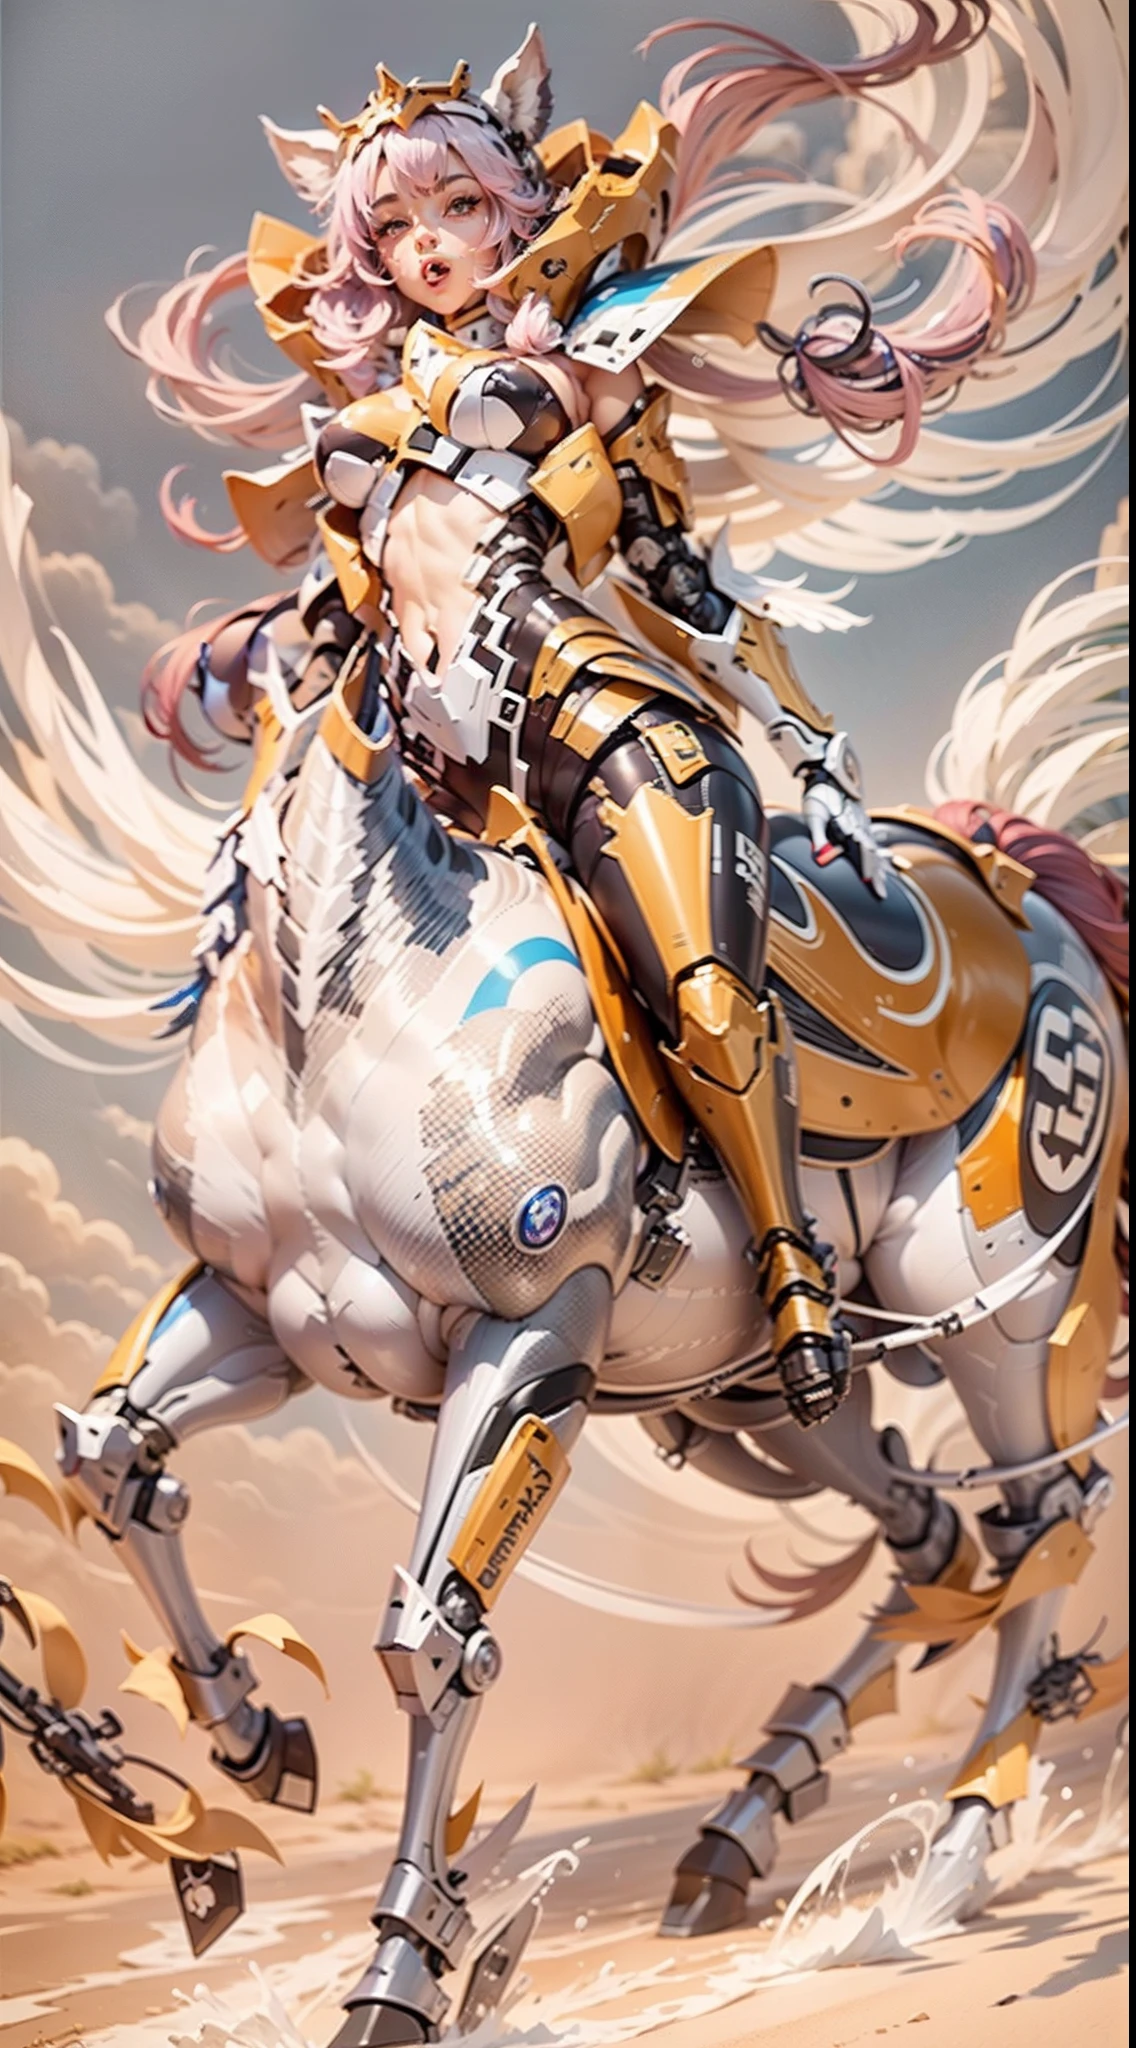 （A female centaur：1.5），She is both（Female: Centaur, half human, half horse, half horse, half horse：1.5），It is also a female Yingzhao。She blends both images，The first is：（（The head of the horse/neck/Shoulder these parts，Replaced with a beautiful female human upper body）：9.9），'s（Female, half-centaur, half-human, half-horse, half-human：1.5），The second is：（（The head of the horse/neck/lower back/hason/gluteal/Shijo Thigh Female Embodiment）：9.9），'s（Seamless chimera of a female half-horse with a beauty：9.9），（It's like a chimera of a female human and a half-horse costume：9.9），This chimerism is based on a strong future（Technologie：1.5）above。The ultra-wide-angle lens captures the image of her beautiful and ethereal wings on the ionosphere launching a super-high-speed charge and leaping。Her front half is distinctly feminine，Tall sexy body，possessed（K cup giant coconut tit chest：9.9），Has（Narrowed small brute waist 5.5）、Butterfly cross、（Long legs：9.9），The embedded interface of the bent female metamorphosis part of the back half of the body is at the hip position of the front half of the body。（The horse-shaped, half-horse torso form of her back body is completely female humanization9.9）。Translucent fluid flowing from the（Narrowed sternum 5.5）The upper end begins to embed the chest cavity of a woman in the shape of a bent dog style at the back of the beautiful woman's body/lower back/Ventral transverse。Then there are the sexy beauty's upright hips，（Her entire body has been completely female and replaced by a female body：9.9），Including the half-horse part。Mechanized armor covers the legs with knee-shaped anti-joints and feet，And these parts are highly anthropomorphic，This makes her legs graceful and slender，Her four horse legs exploded in length proportions and was slender and toned，Under the legs are skinny white feet dressed in Skyscraper Heels，Use Midjourney's advanced stroke tools and color palettes, as well as texture packs, model packs, and texture tools，Concentration，Include